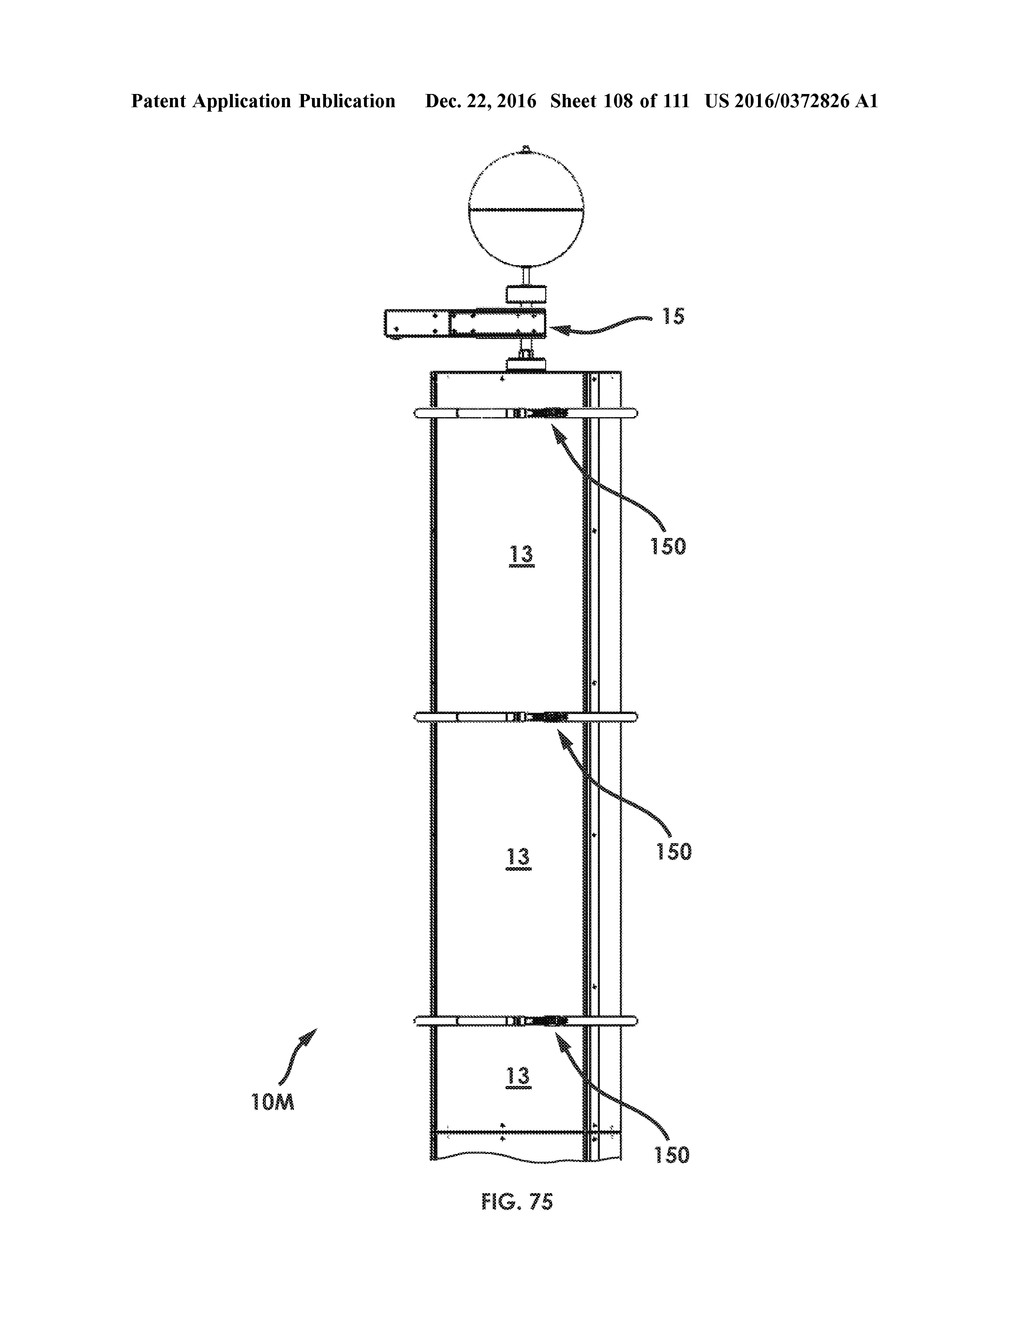 COMMUNICATION TOWER PANEL SECURITY DEVICE EMPLOYING FLEXIBLE PLASTIC     BANDING AND A CONNECTING/TENSIONING ASSEMBLY HAVING PASS-THROUGH CHANNELS     FOR SAFELY SECURING RADIATION-TRANSPARENT PANELS COVERING ANTENNA SERVICE     BAYS OF A WIRELESS TELECOMMUNICATION TOWER - diagram, schematic, and image 109